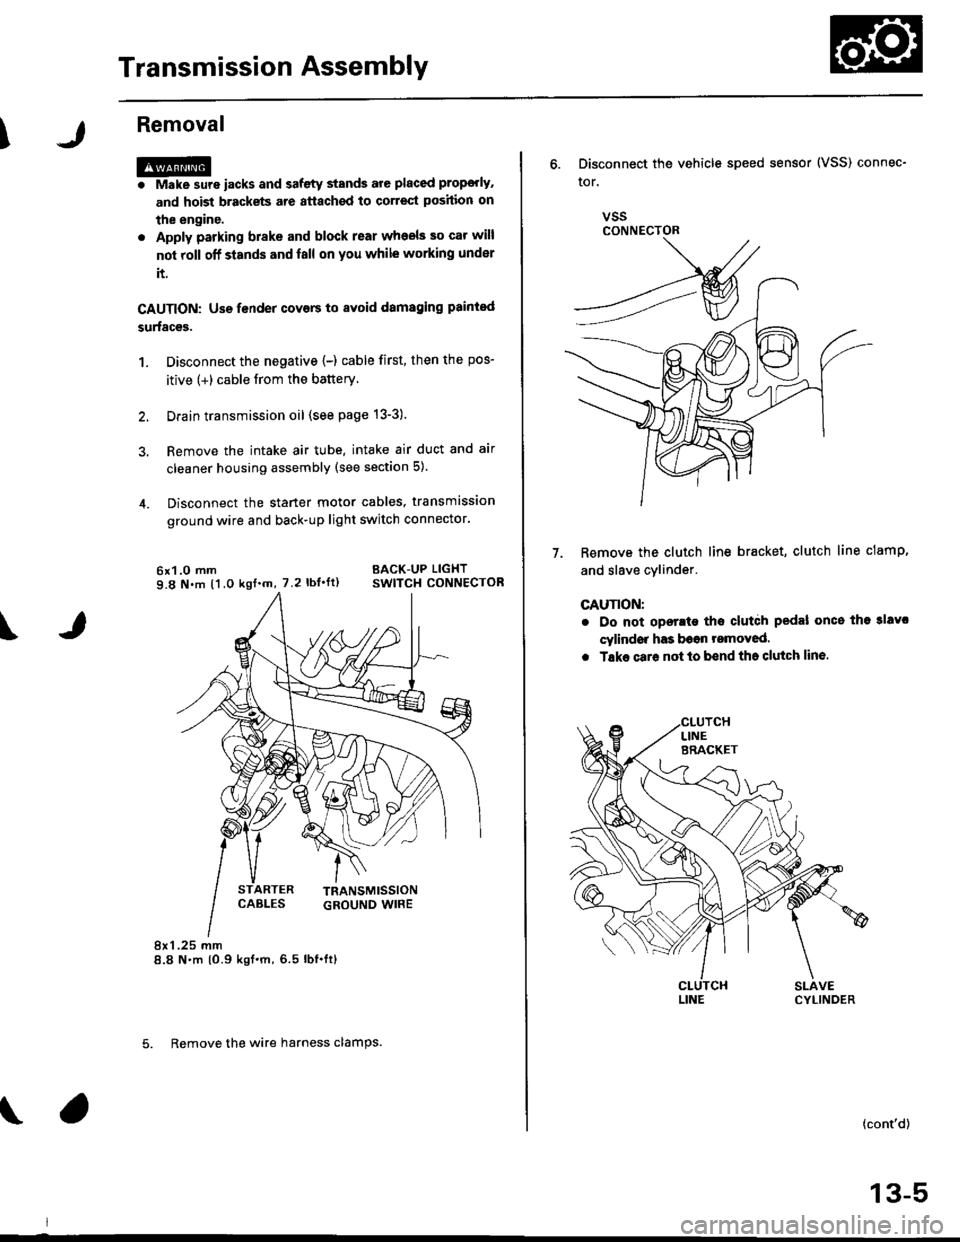 HONDA CIVIC 1997 6.G User Guide Transmission Assembly
I
Removal
@. Make sure iacks and safety stands are placed prop€dy,
and hoist brackets are atlach€d to correct position on
the enginc.
. Apply parking brake and block rear who